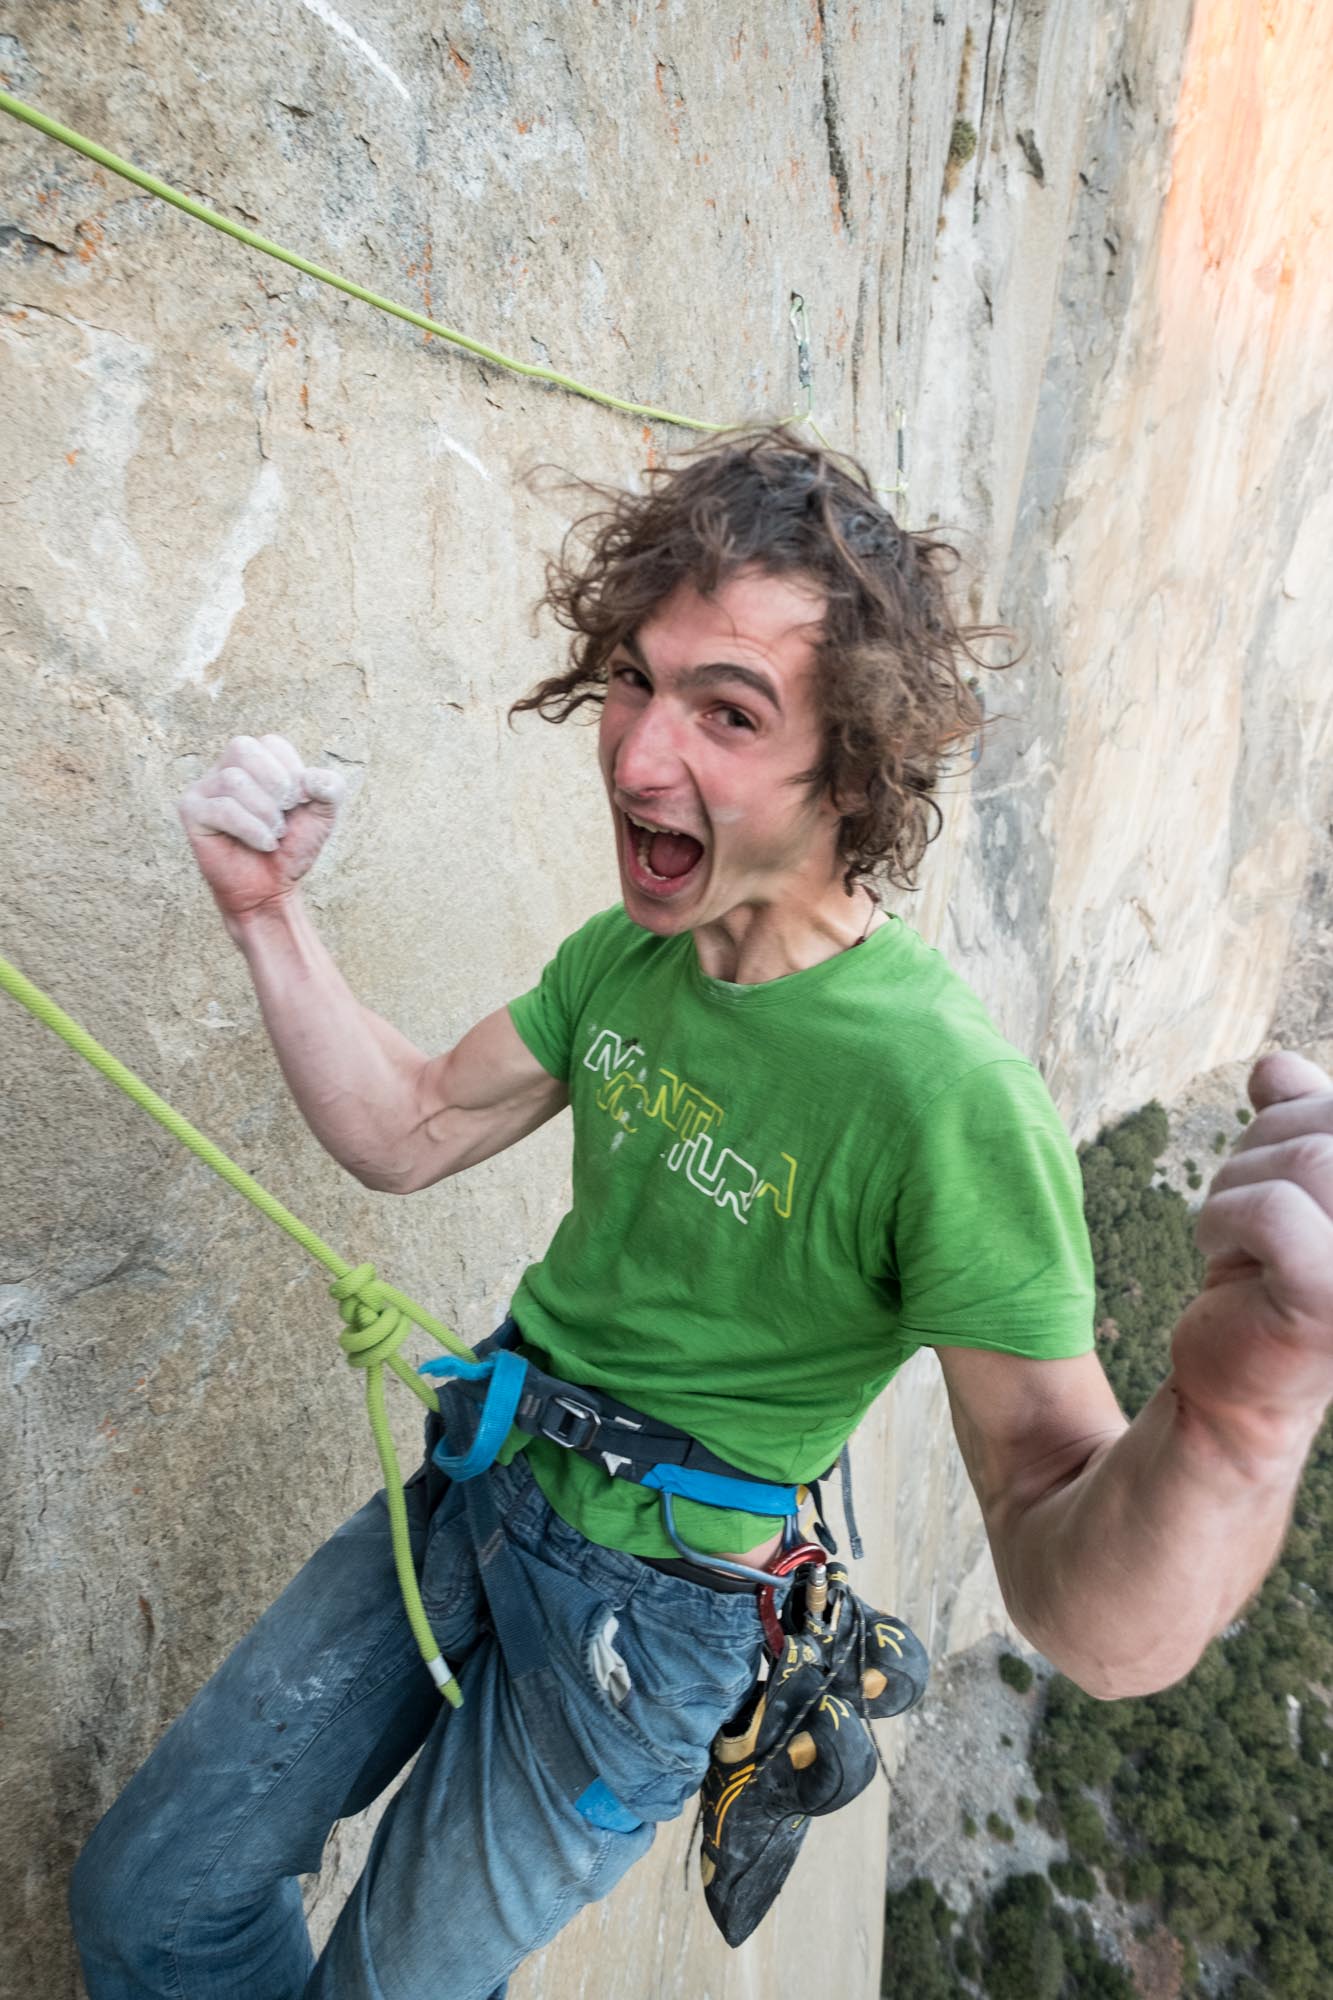 Adam Ondra celebrating after he finished the most difficult pitches of the climb. Photo Courtesy Heinz Zak/ Black Diamond Equipment